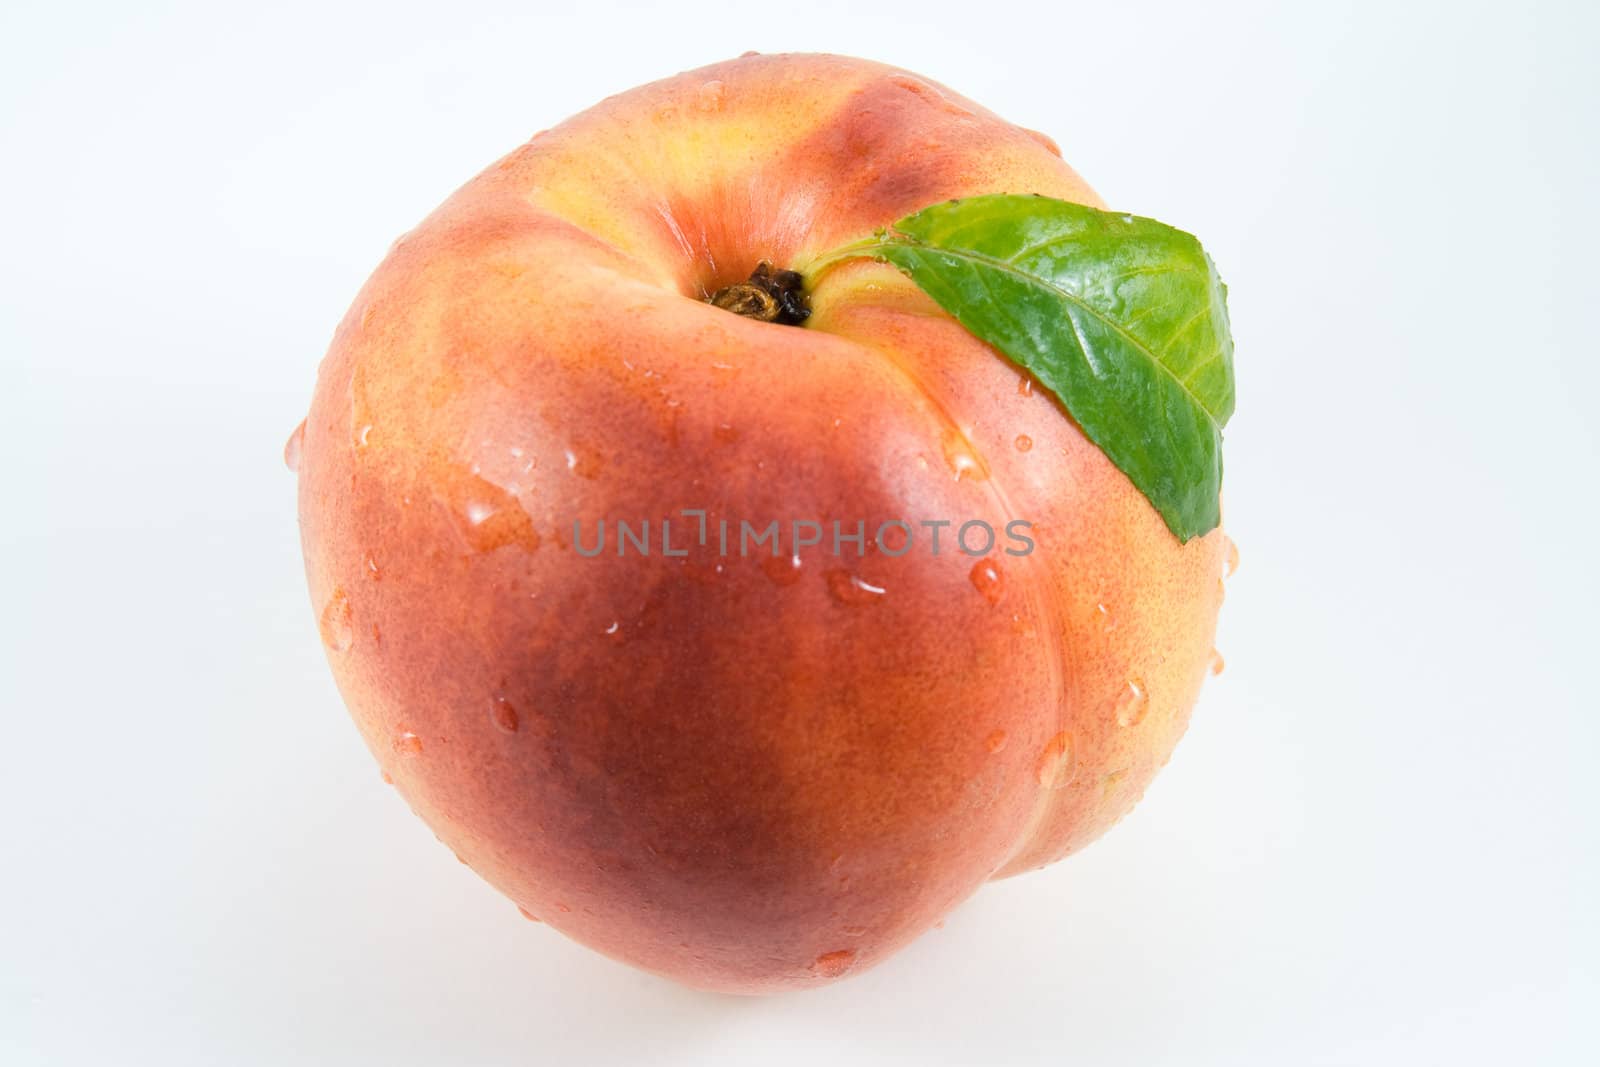 Nectarine with water drops on white background